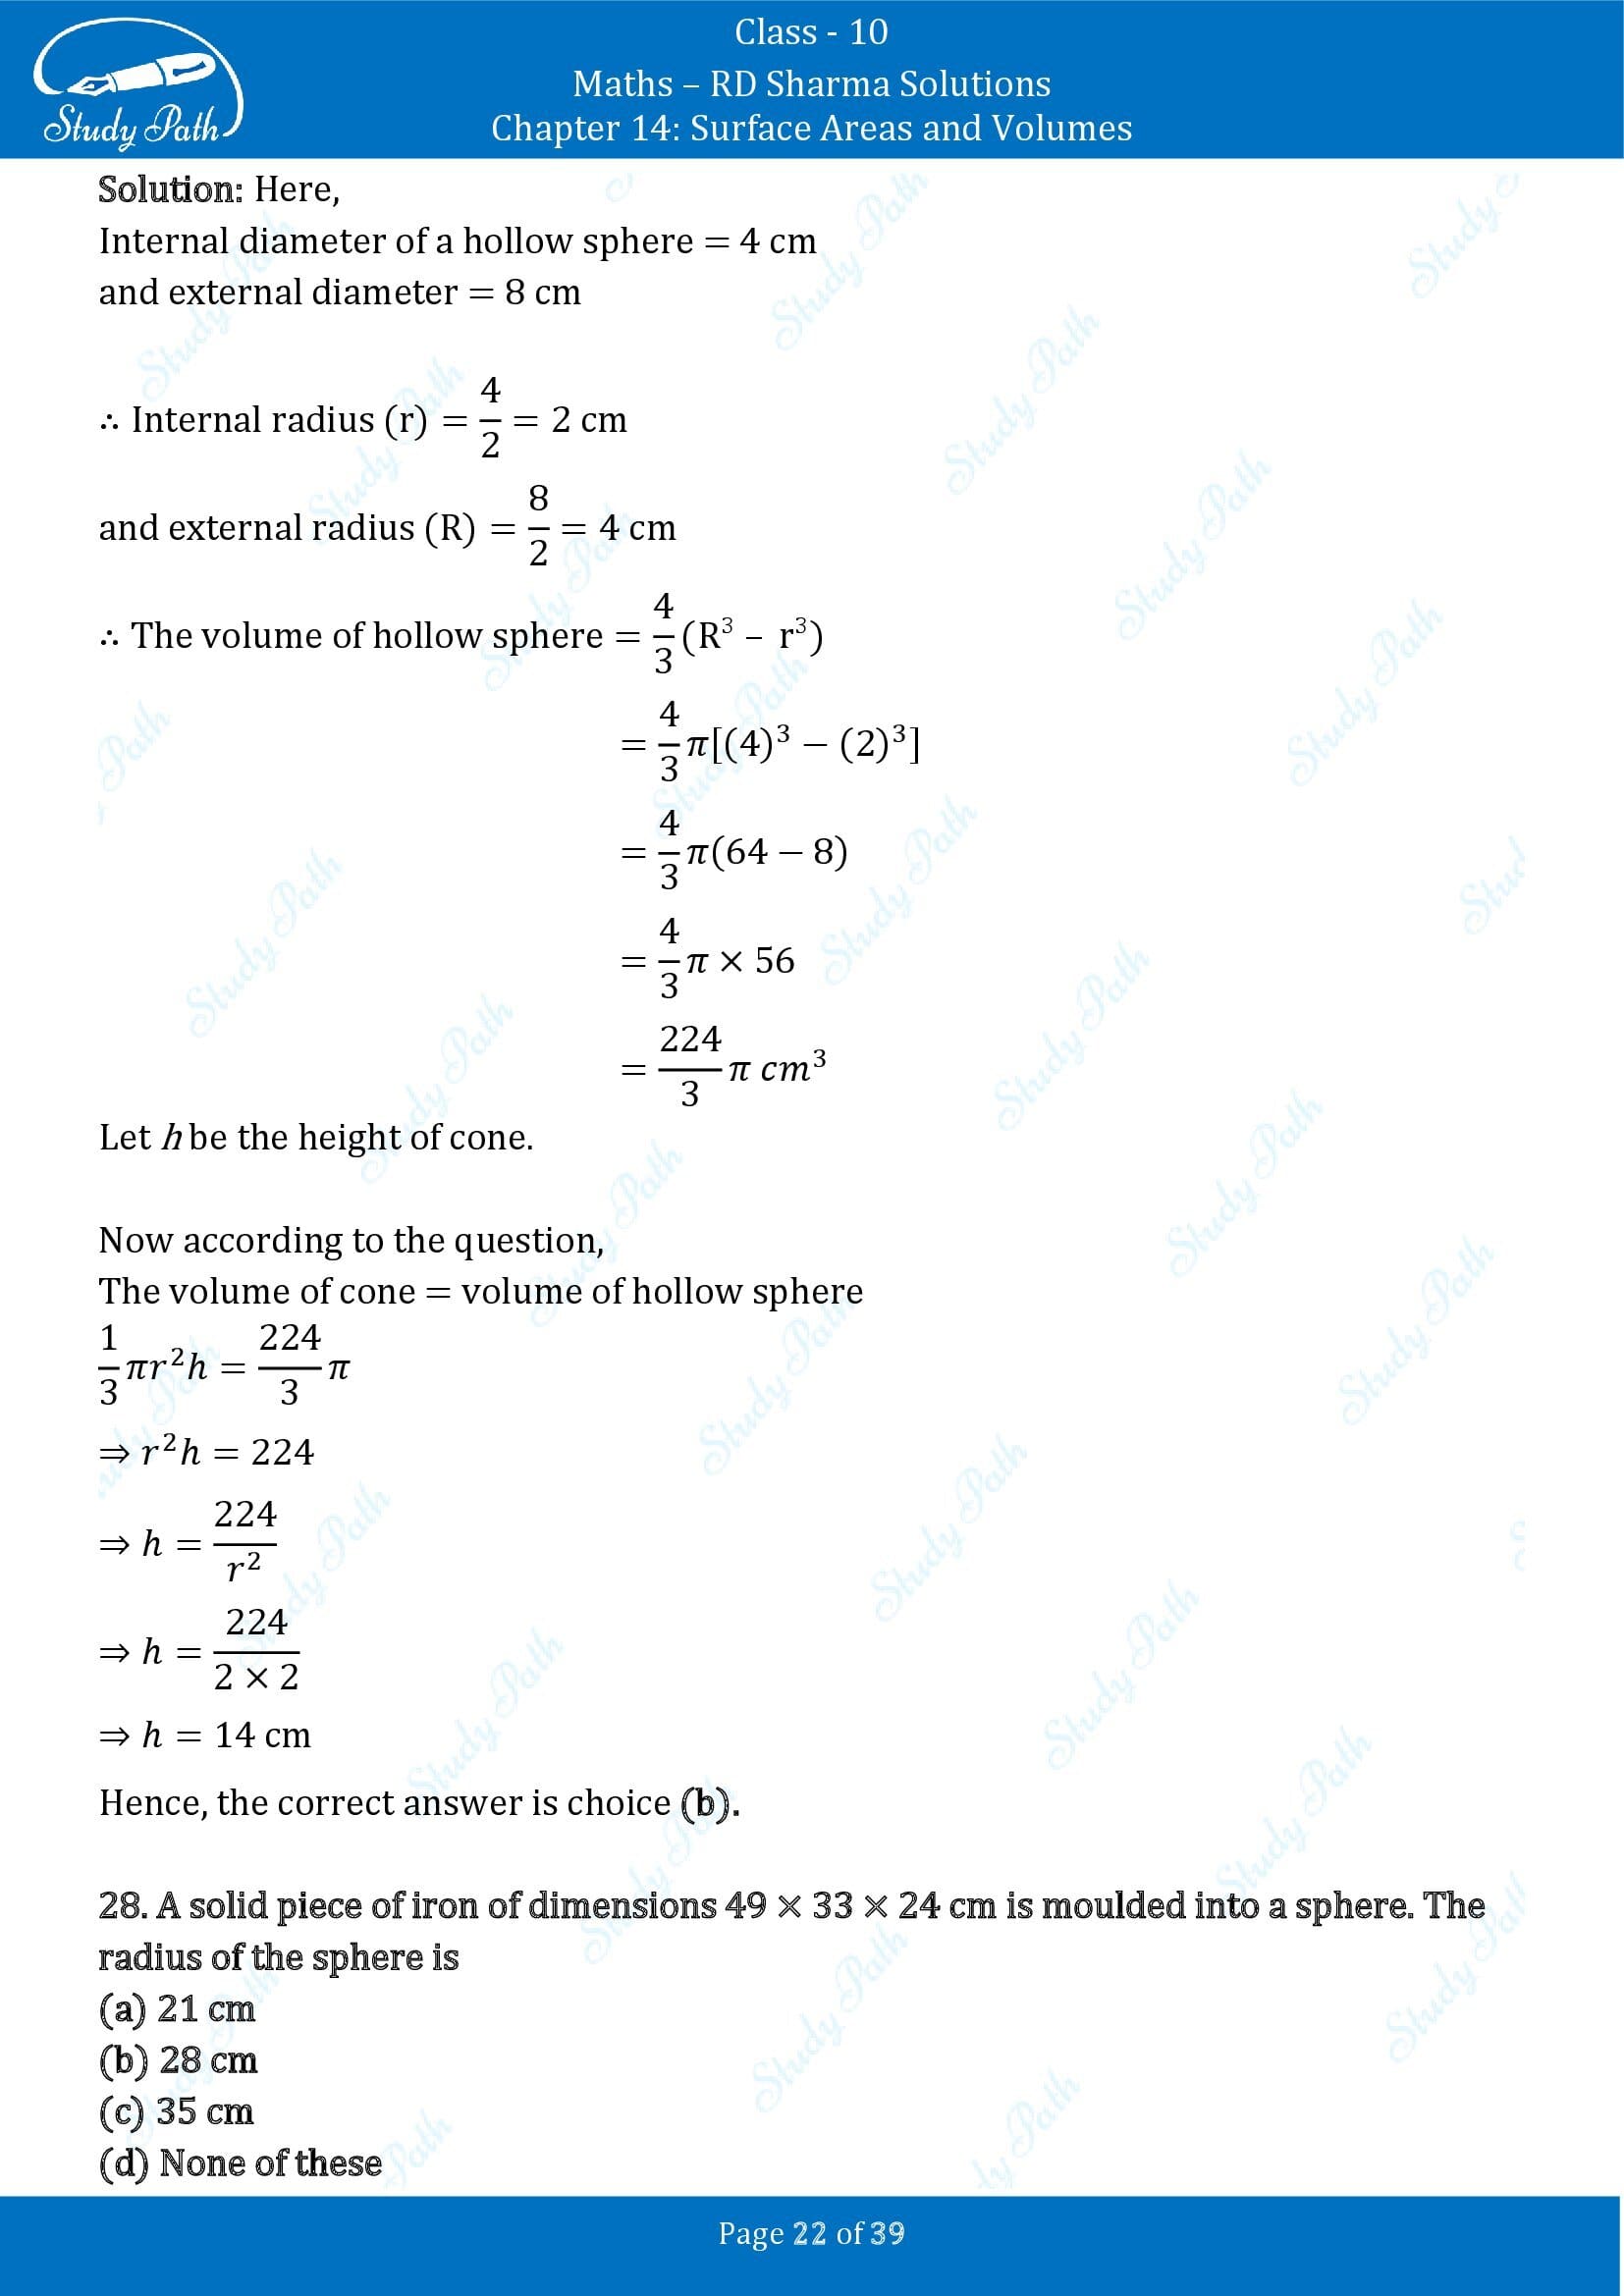 RD Sharma Solutions Class 10 Chapter 14 Surface Areas and Volumes Multiple Choice Question MCQs 00022